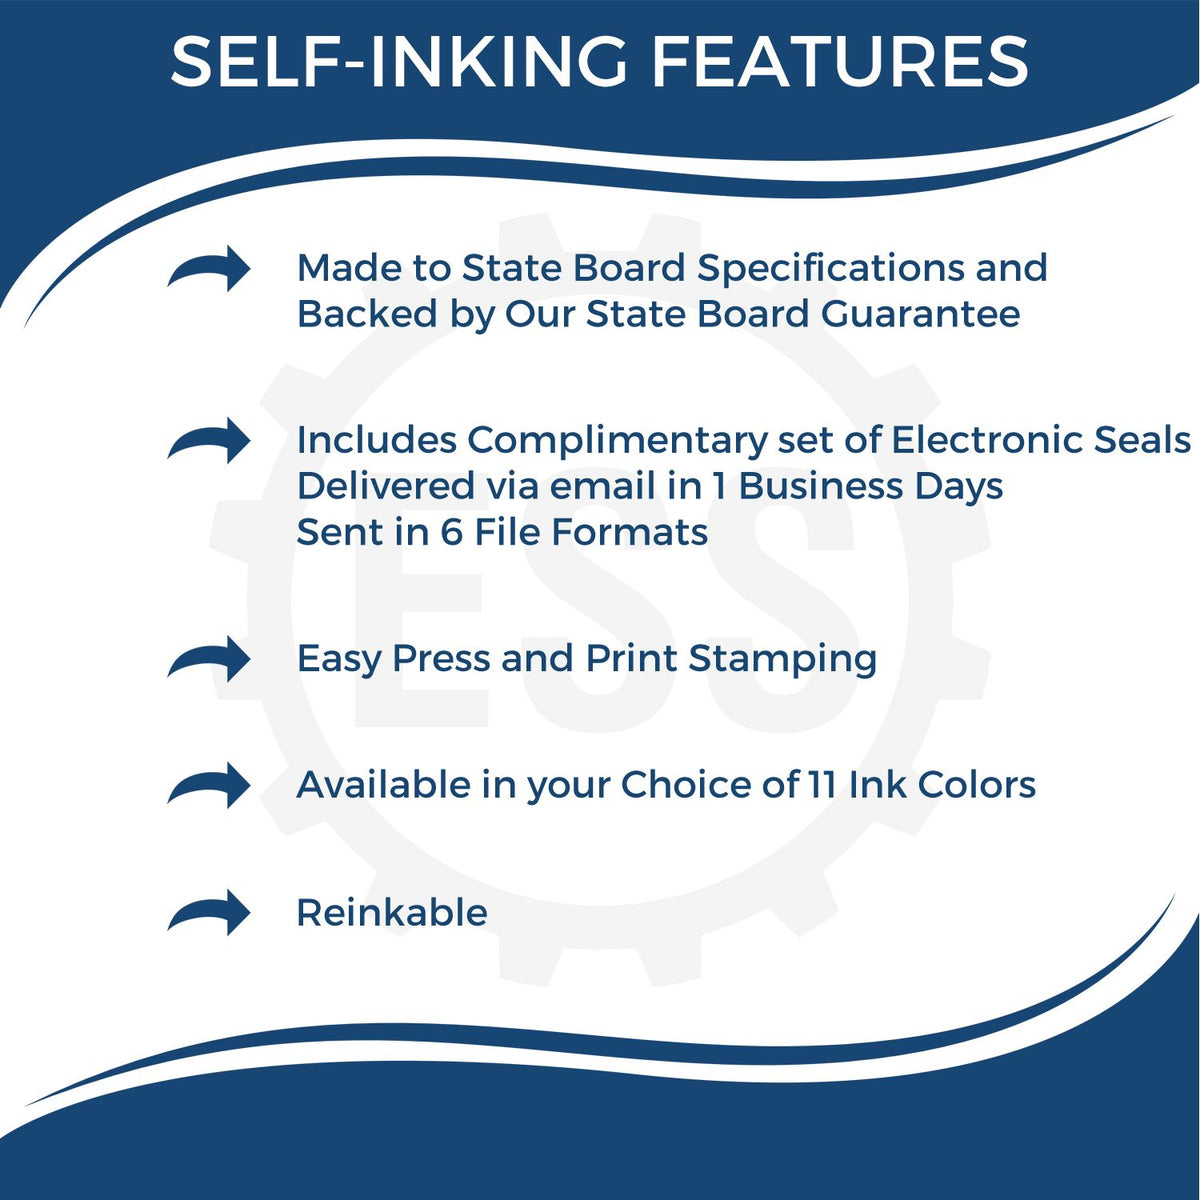 A picture of an infographic highlighting the selling points for the Self-Inking Maine Landscape Architect Stamp